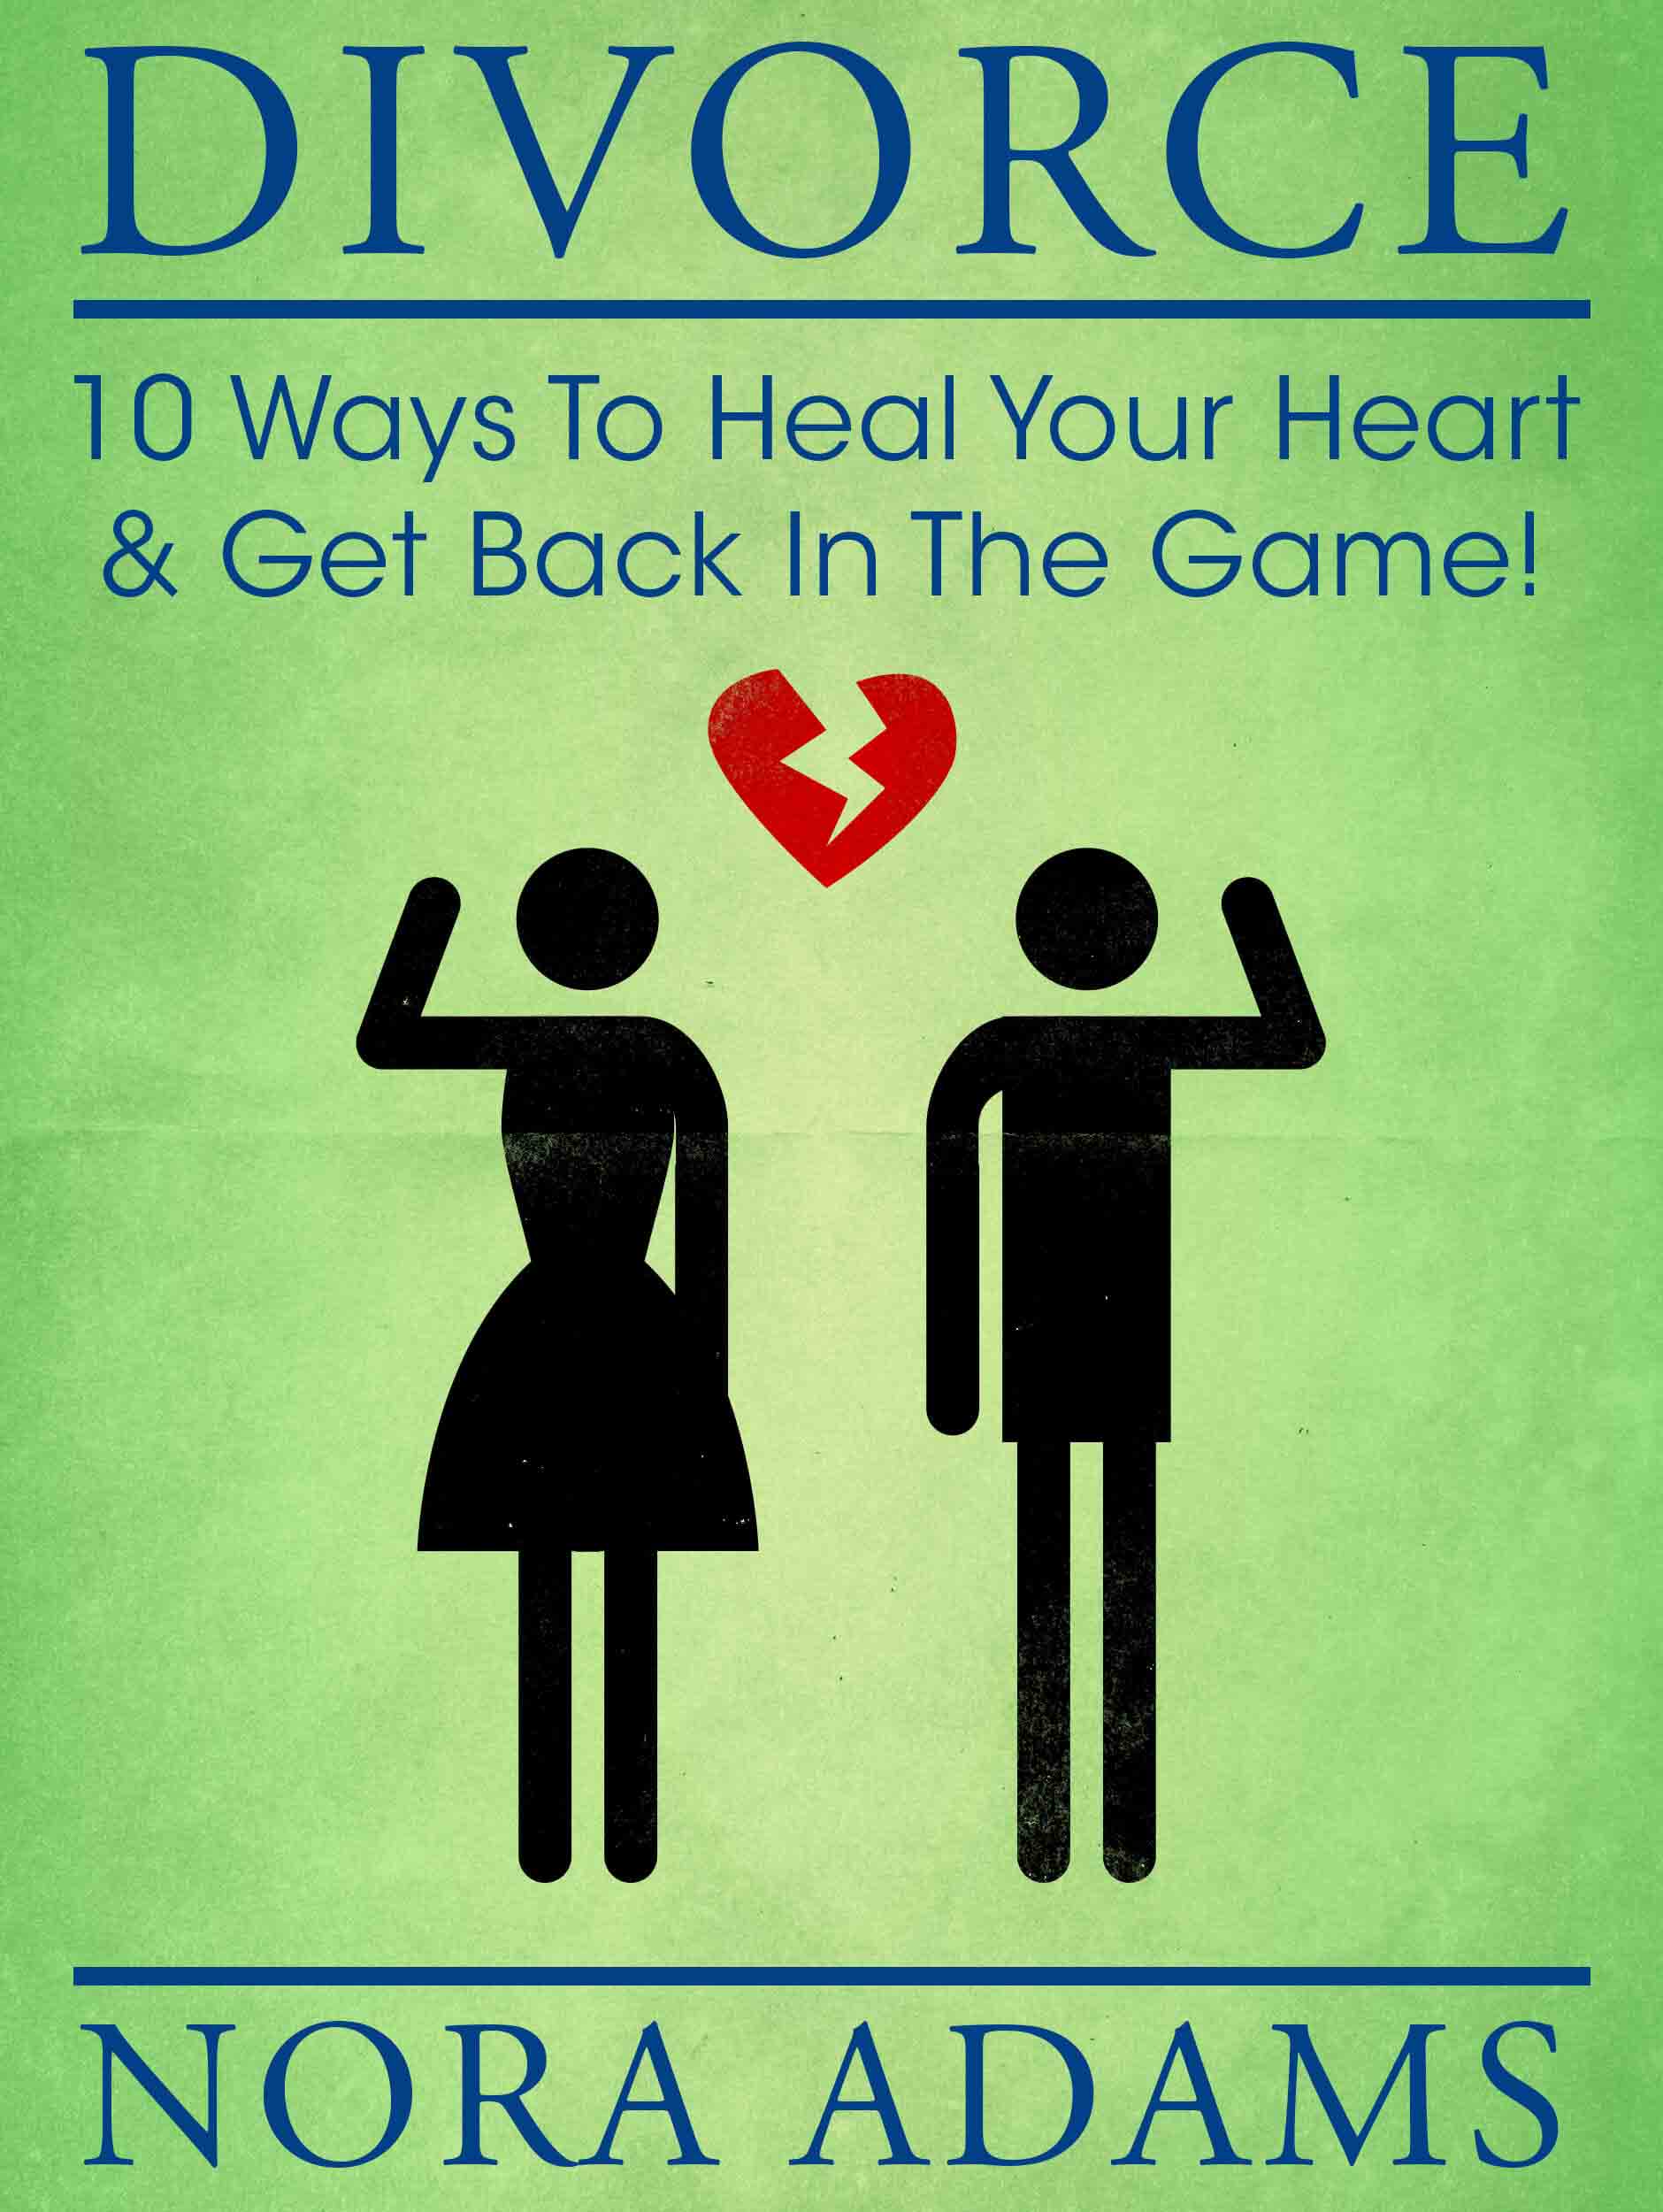 FREE: Divorce: 10 Ways To Heal Your Heart & Get Back In The Game! by Nora Adams